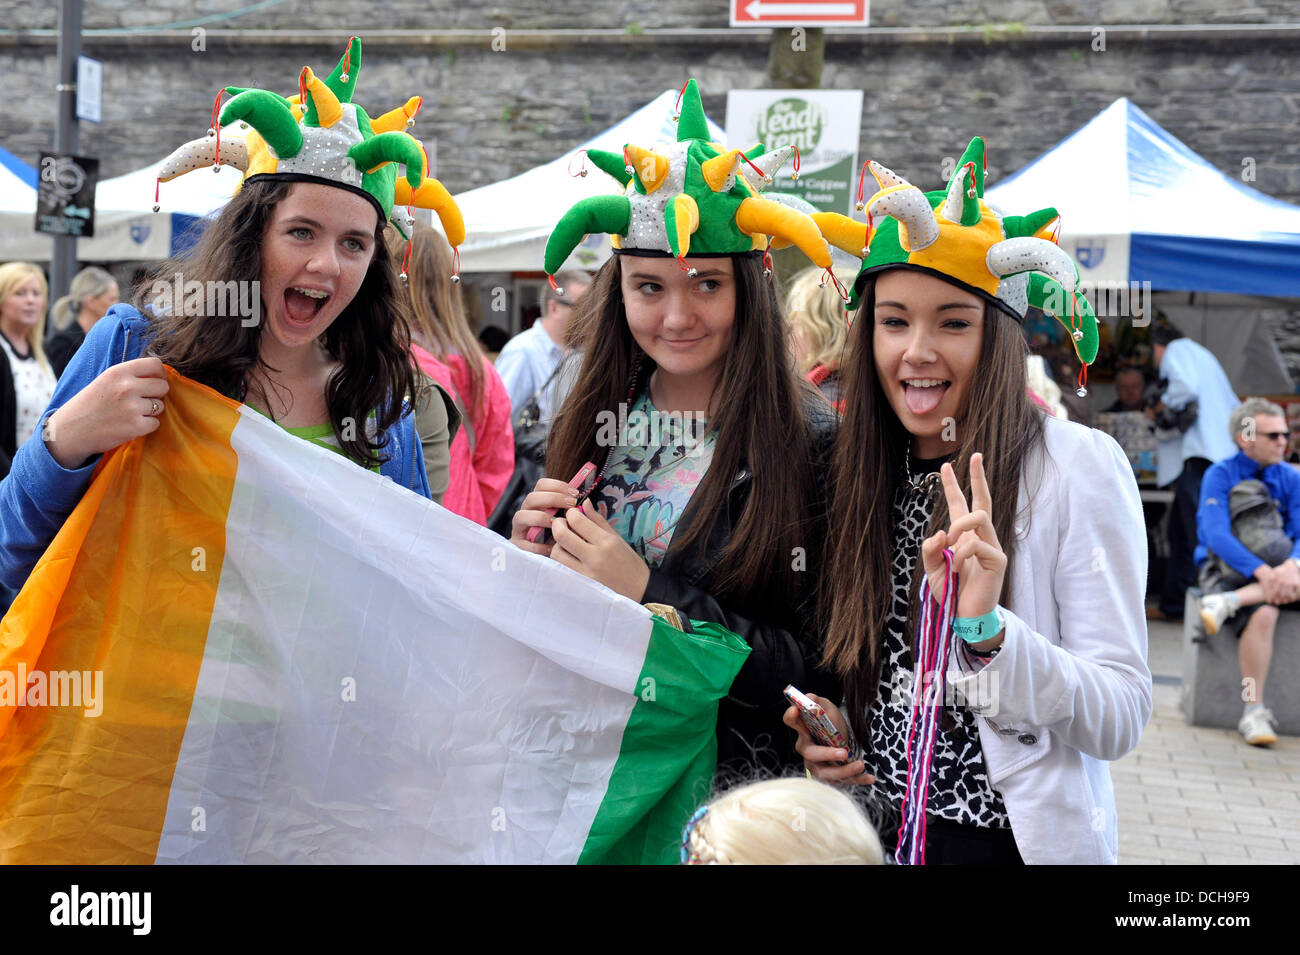 Derry, Londonderry, UK. 18th August 2013. Young girls, in Guildhall Square, enjoying the final day of the week long Fleadh Cheoil, the biggest celebration of Irish traditional and folk music in the world. Over 300,000 visitors experienced the week long Irish culture festival. .  Credit: George Sweeney / Alamy Live News Stock Photo